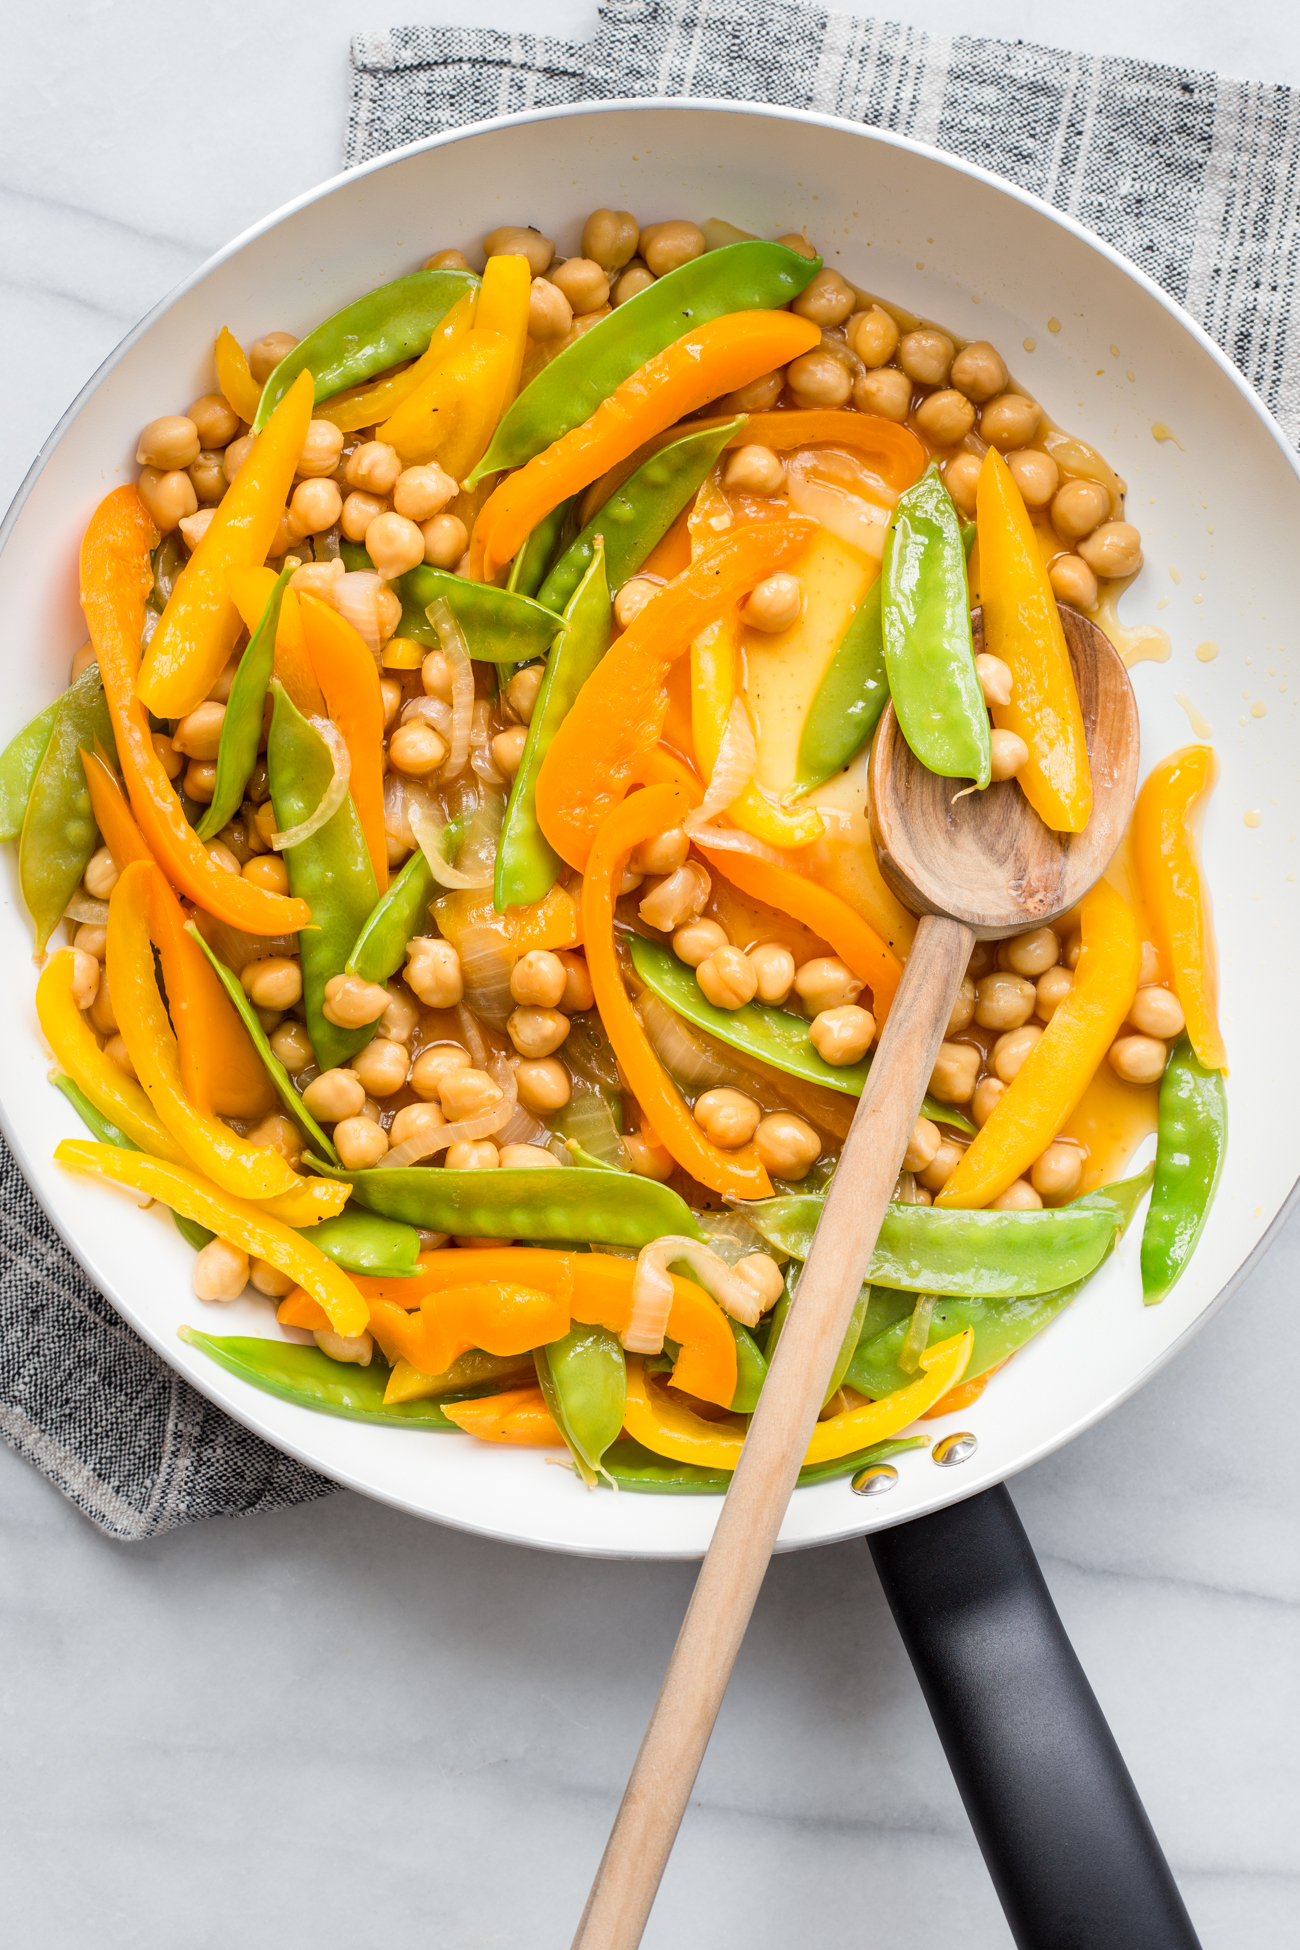 Your New Go-To Meatless Monday Dinner: Quick Chickpea Stir Fry